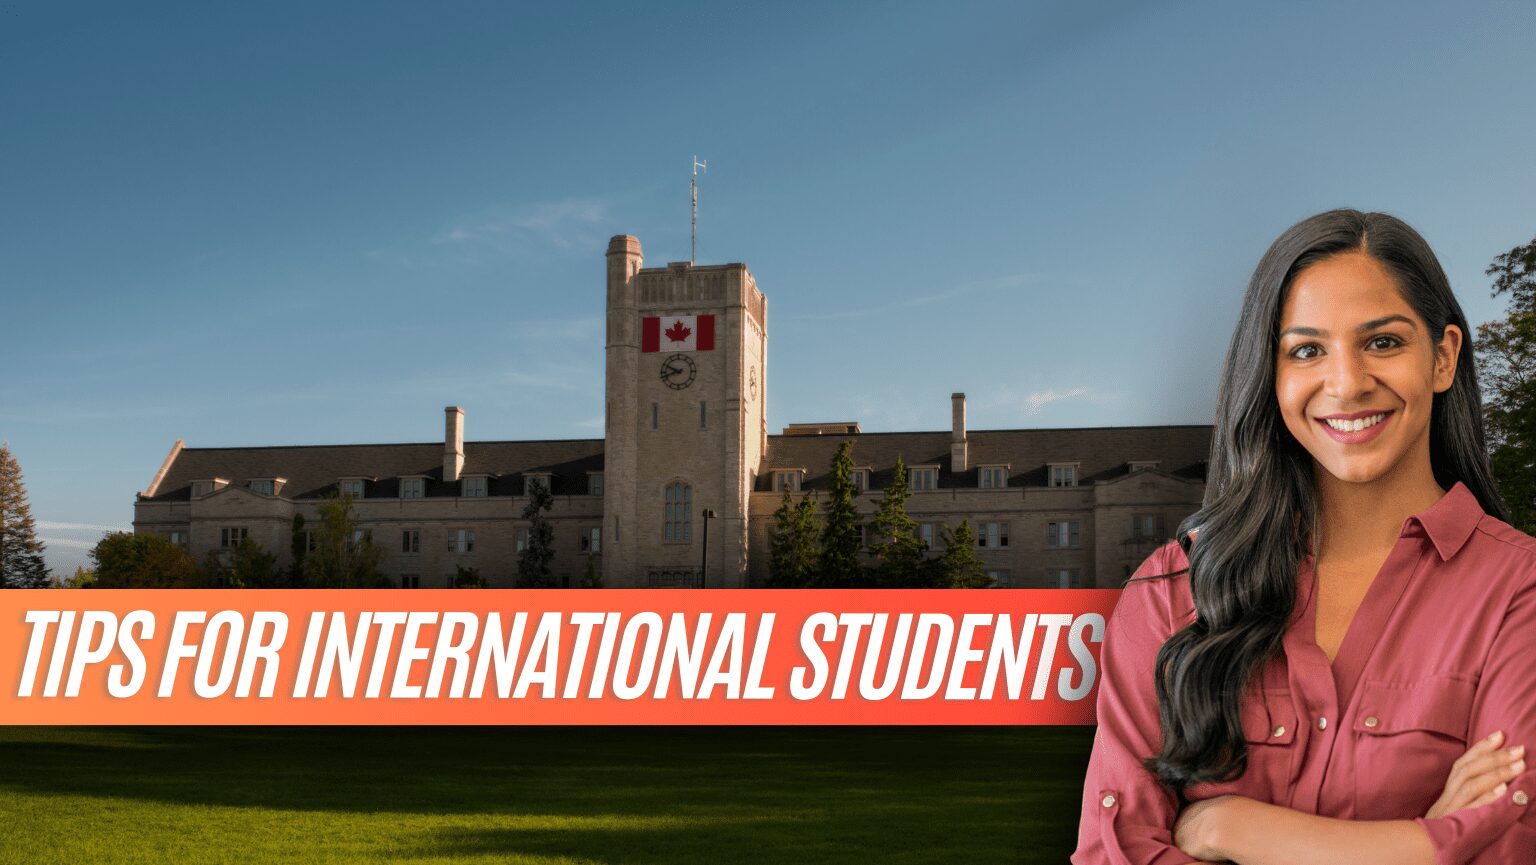 Tips for international students